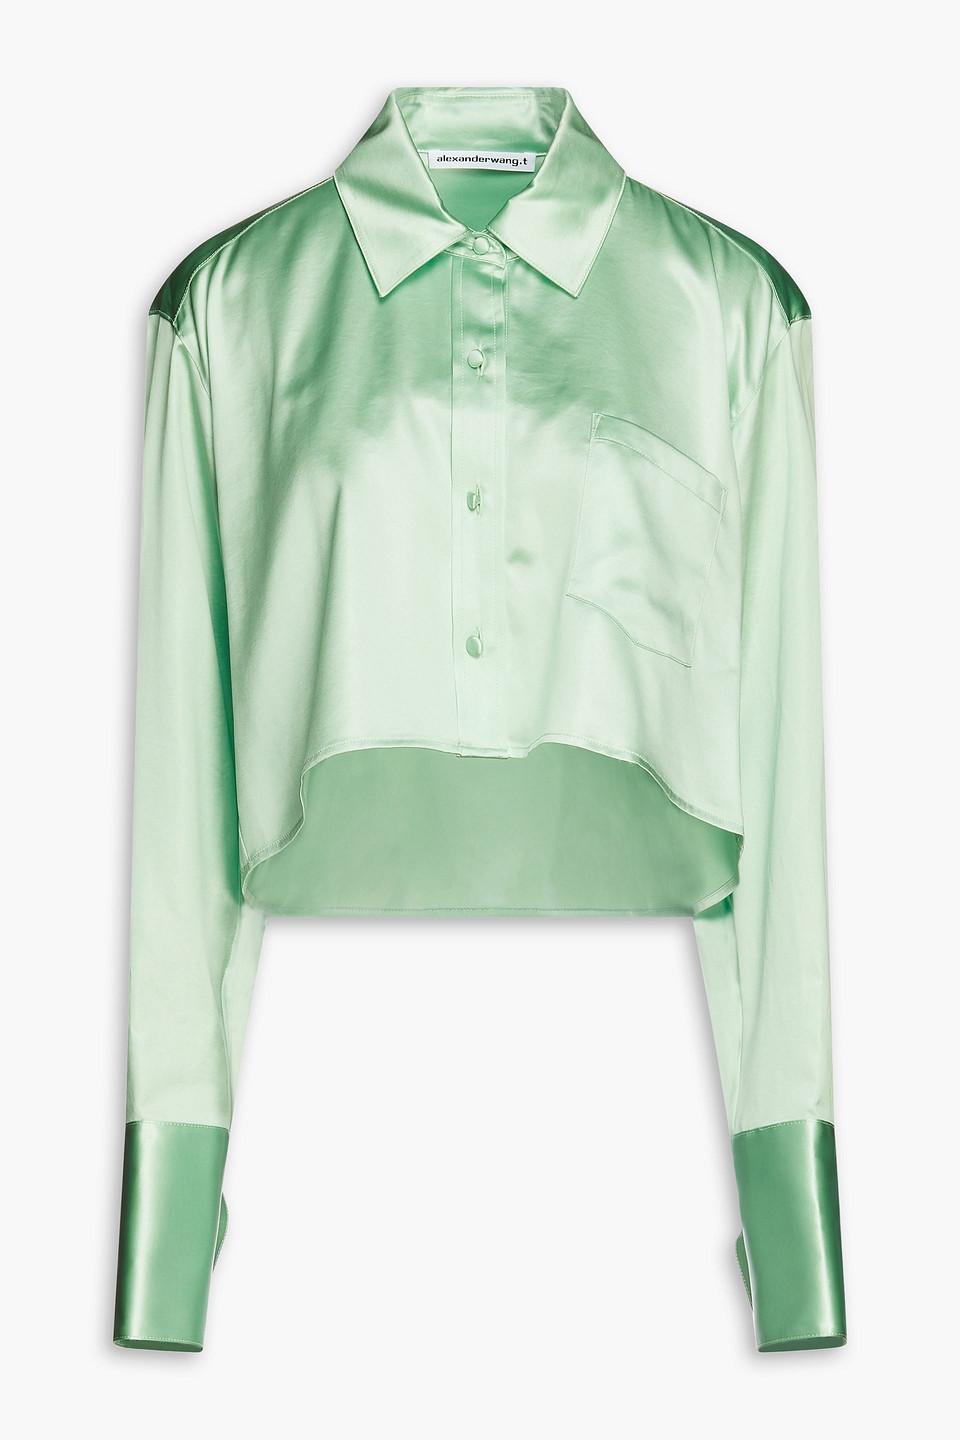 T By Alexander Wang Cropped Satin Shirt in Green | Lyst Canada